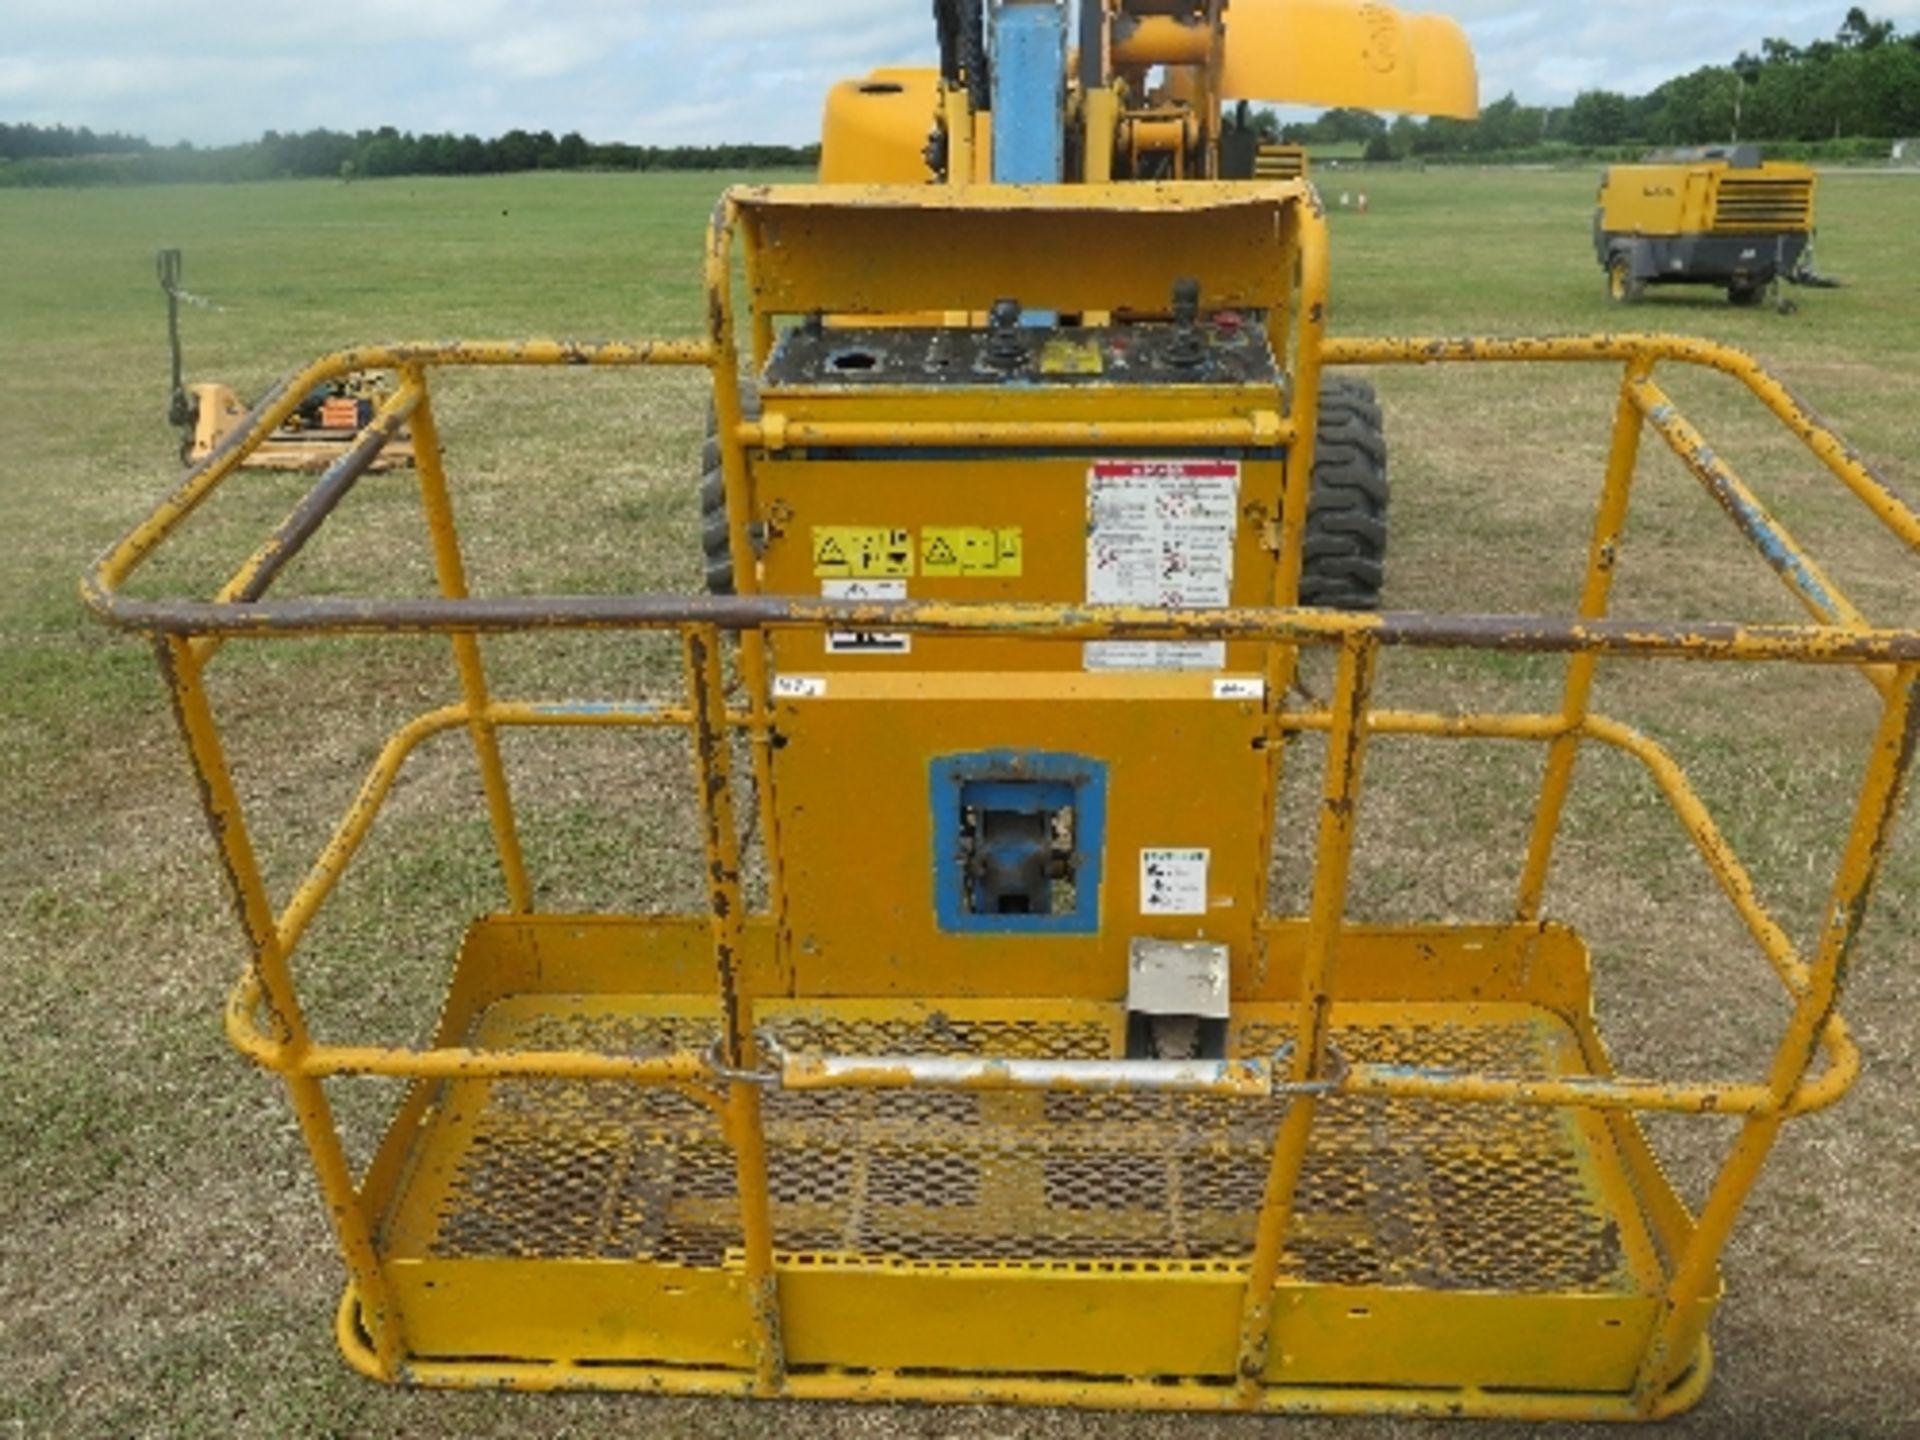 Genie Z45/25 artic boom 2003 AB723
2,790 HOURS
ALL LOTS are SOLD AS SEEN WITHOUT WARRANTY - Image 4 of 5